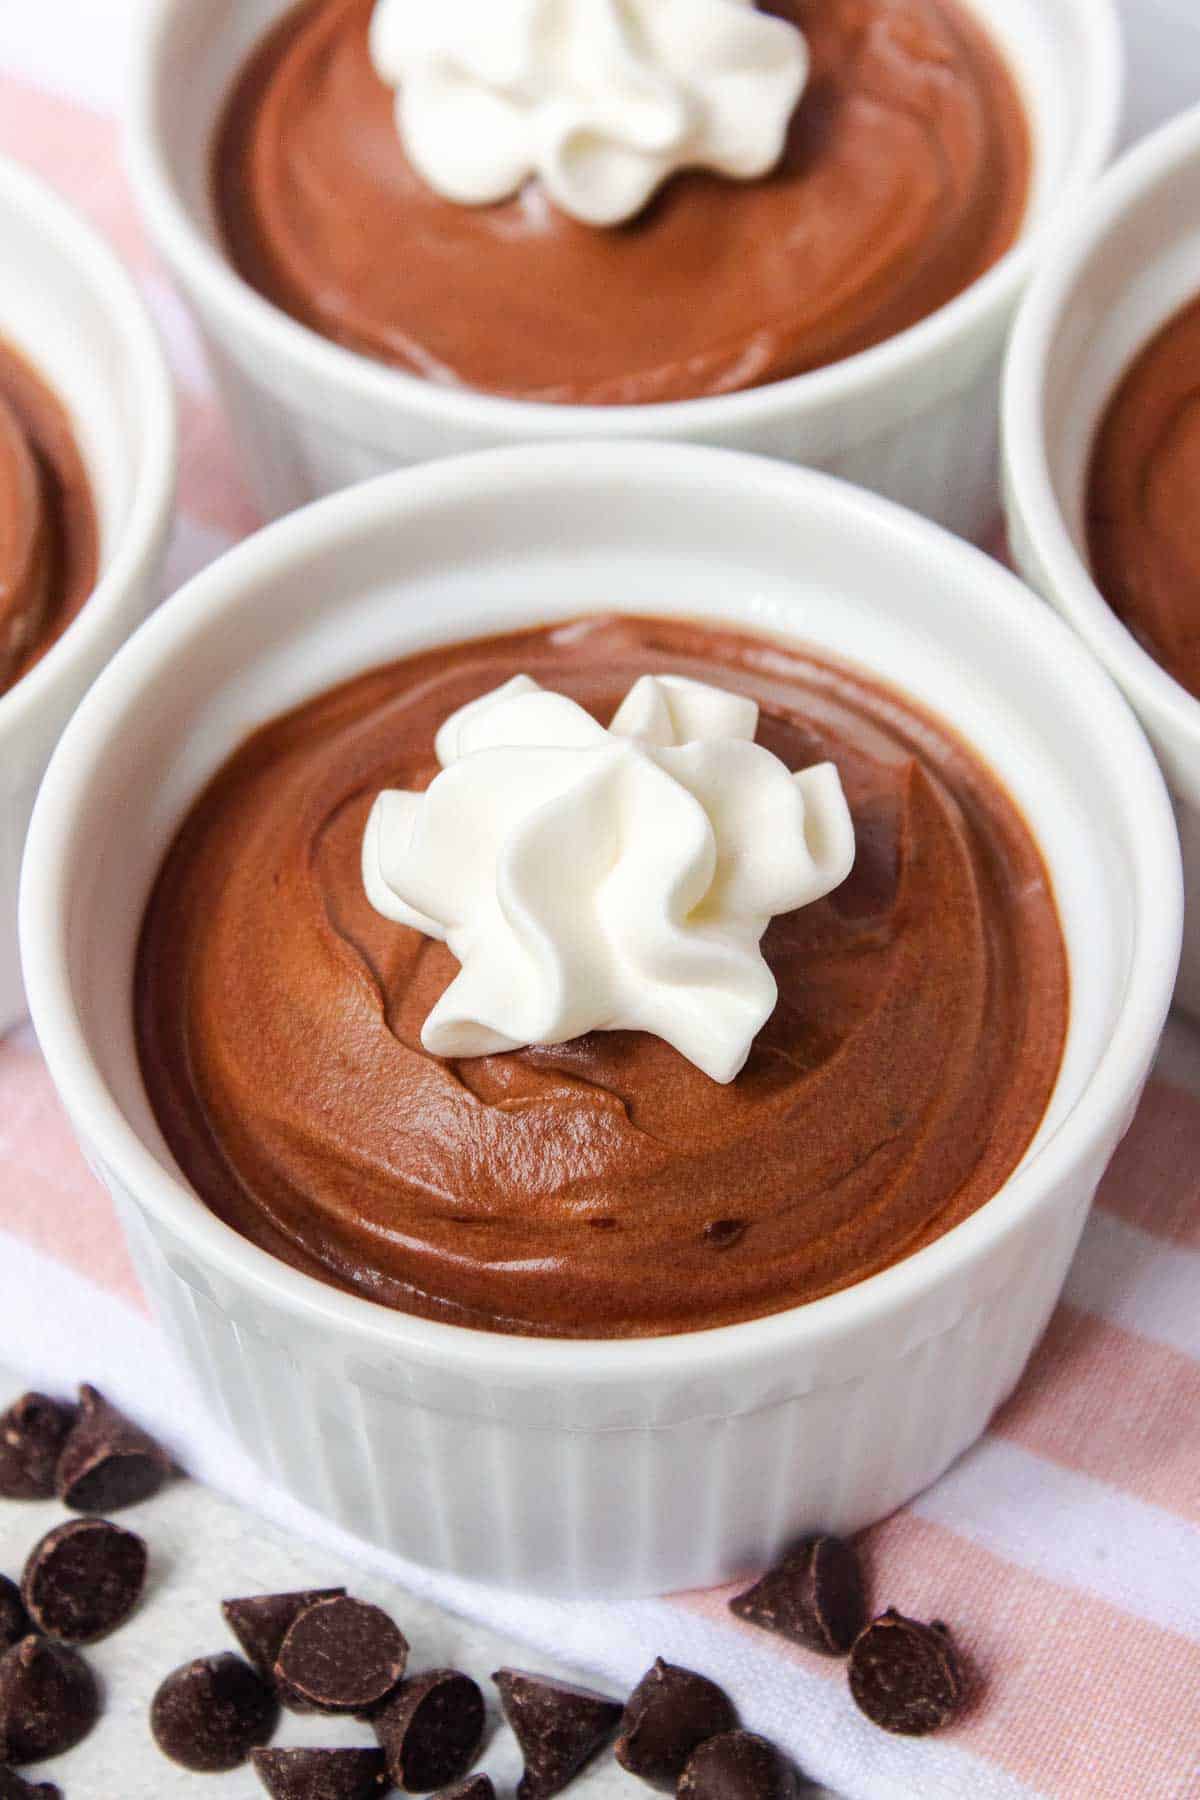 Chocolate Mousse topped with whipped cream